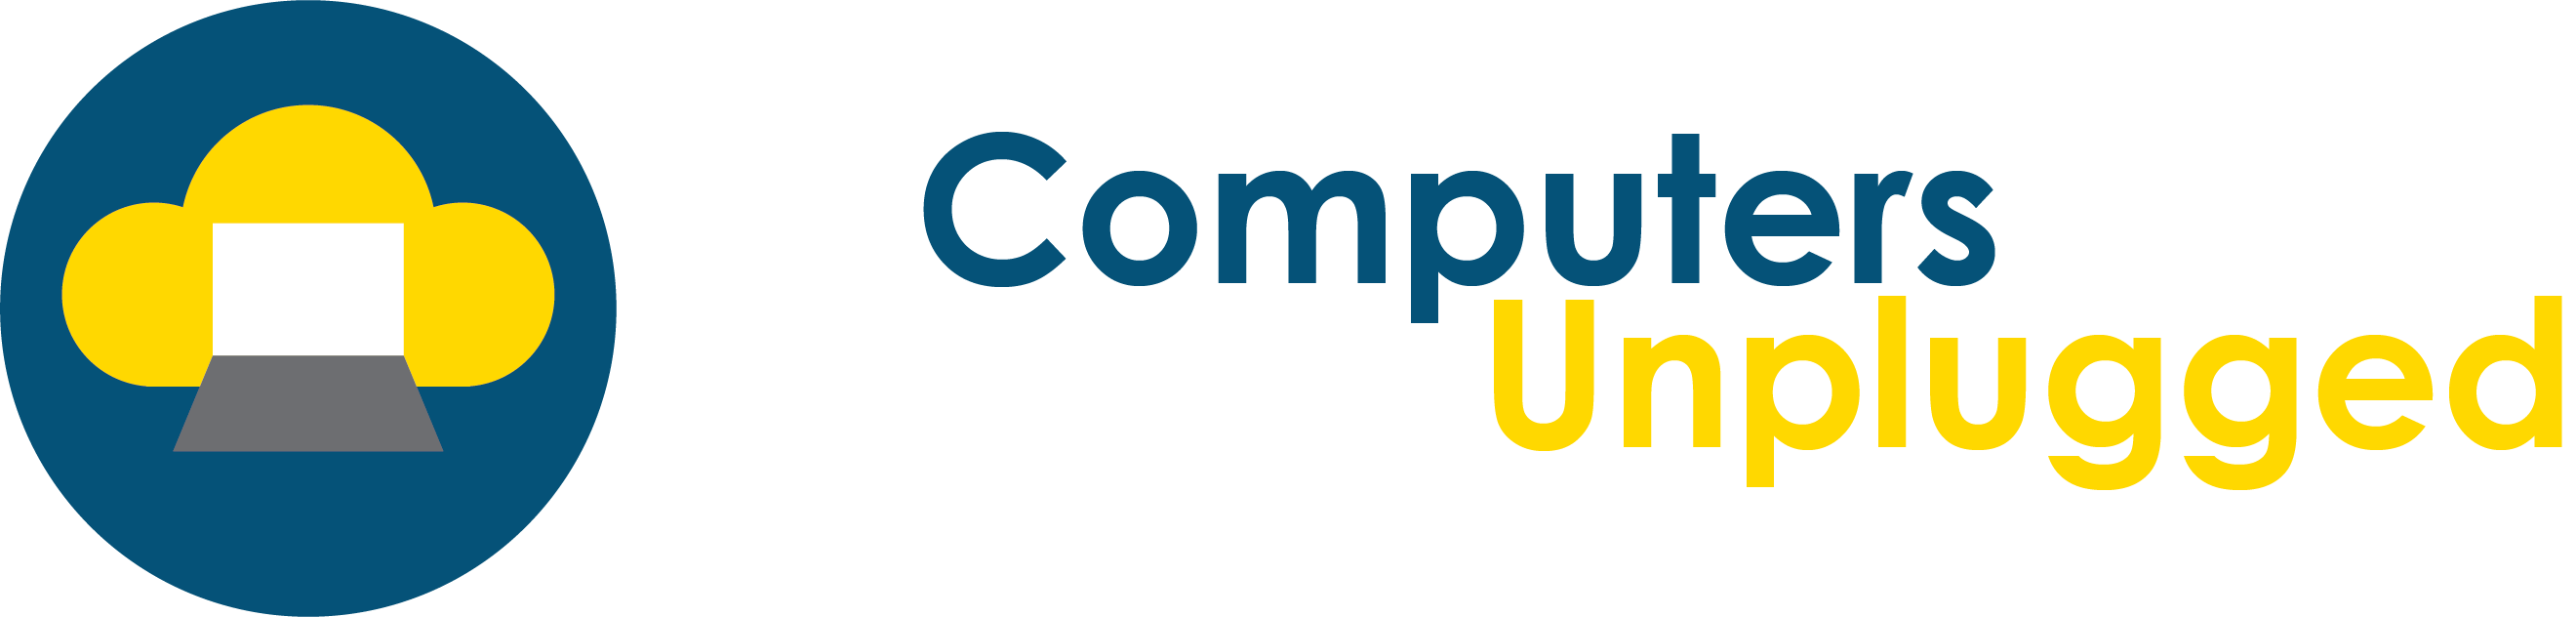 Computers Unplugged